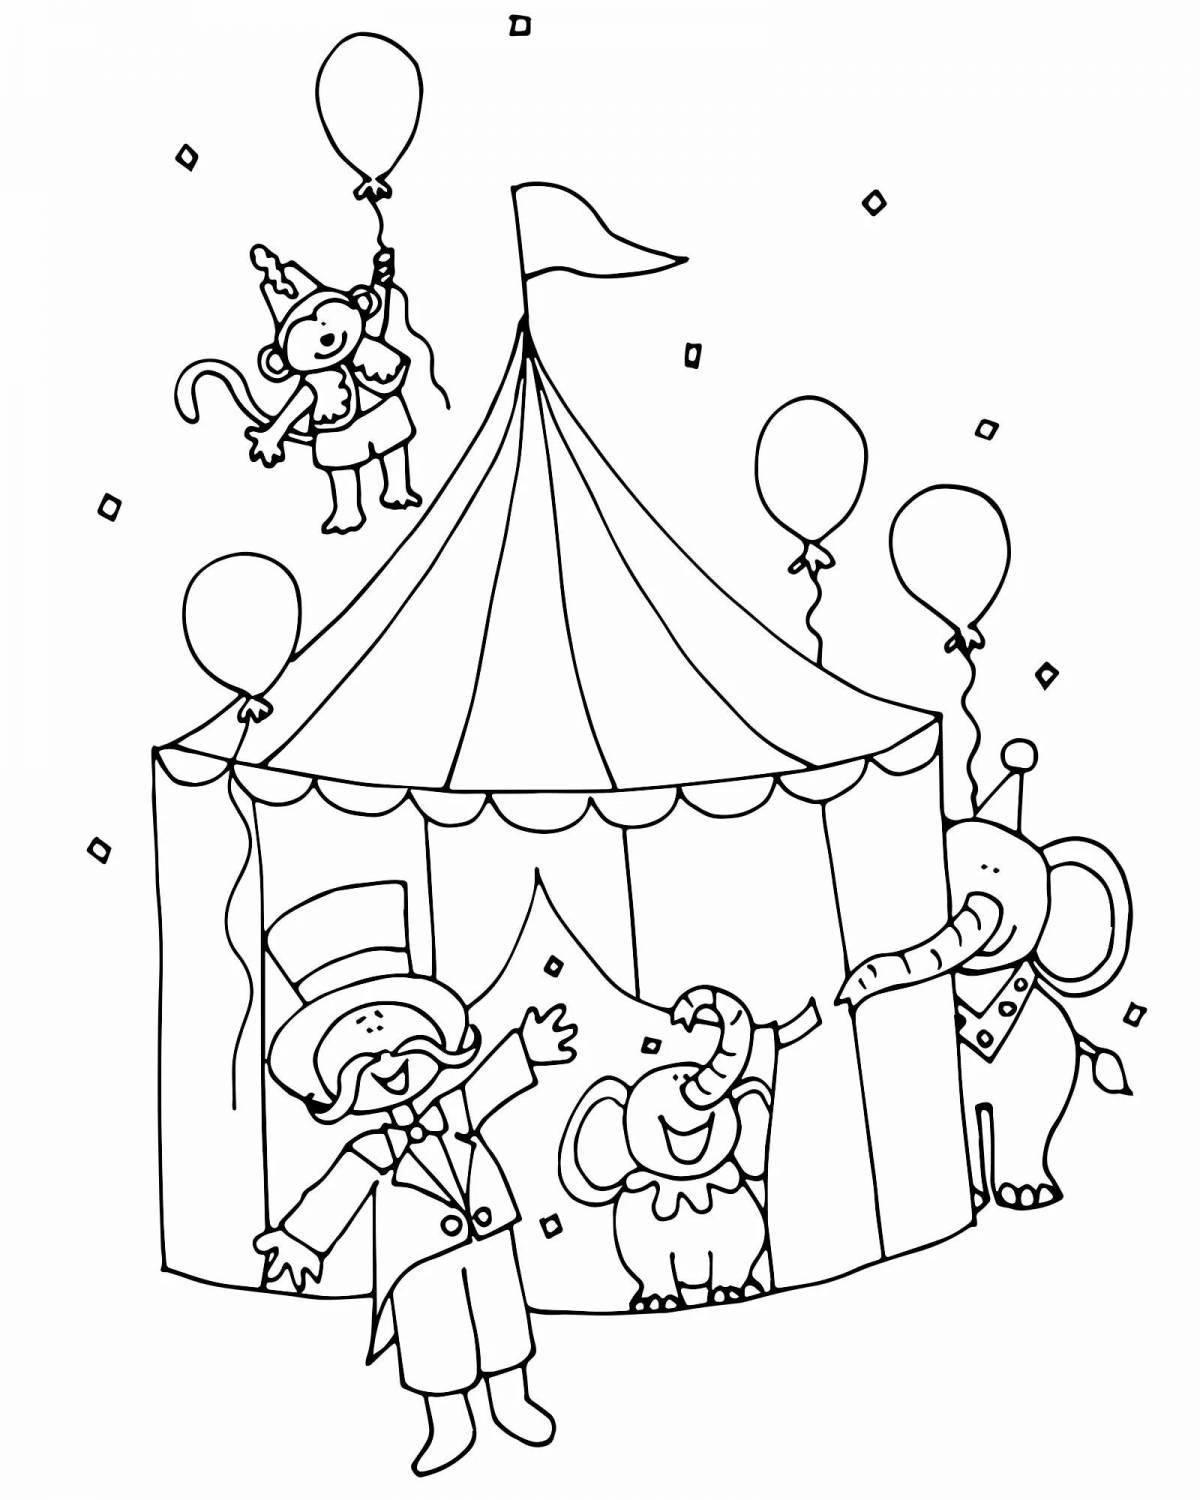 Great theatrical coloring book for kids